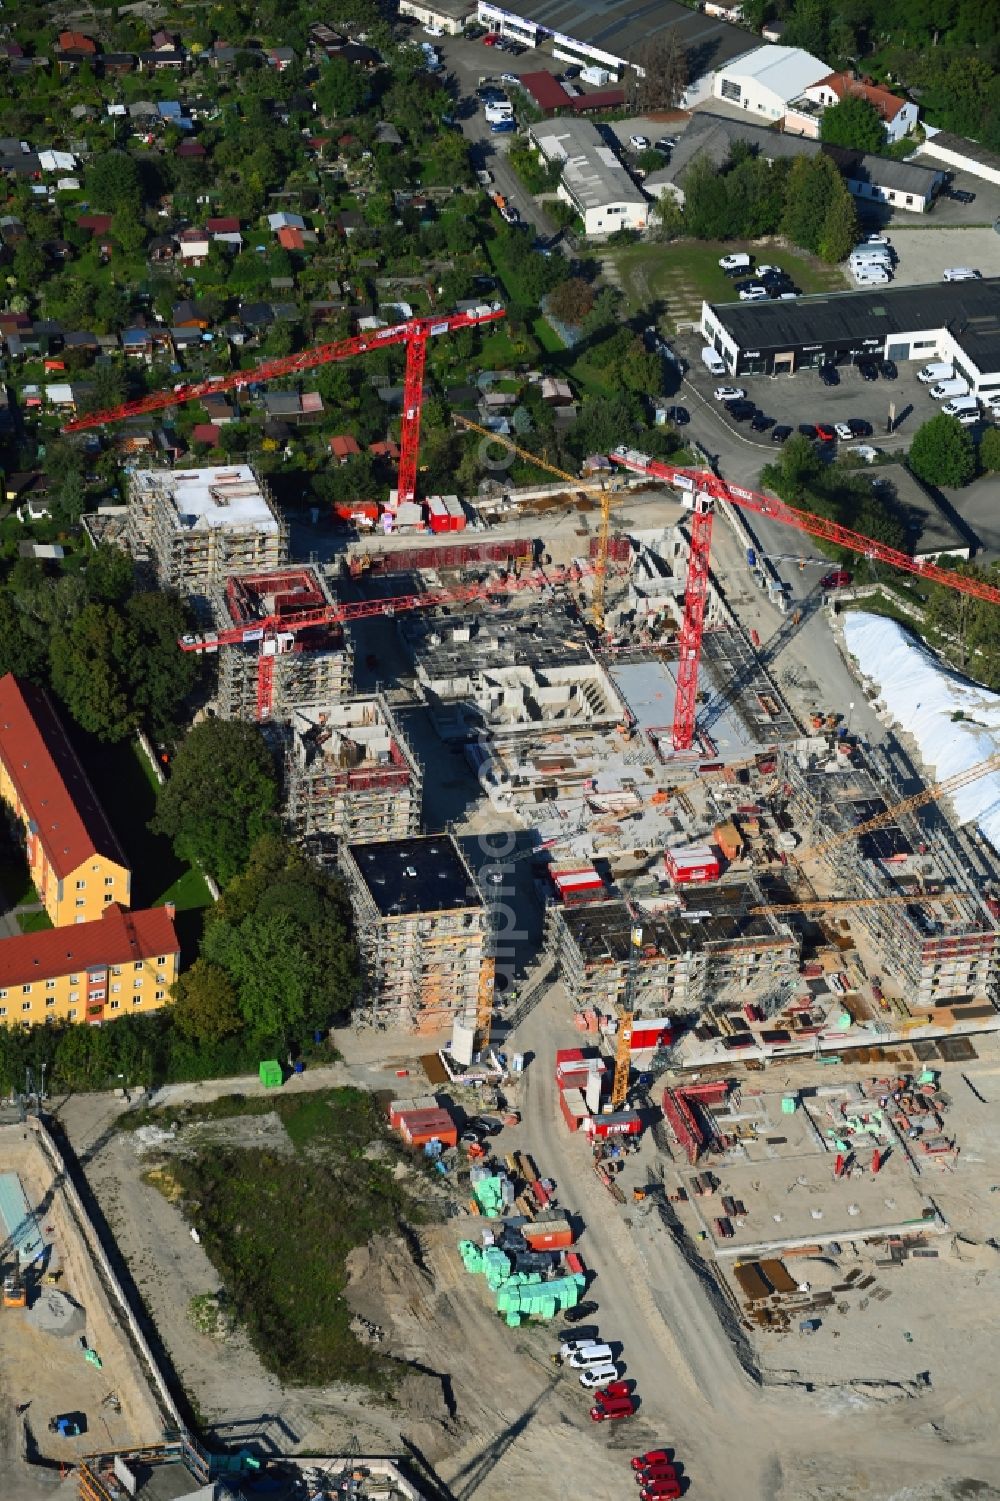 Augsburg from the bird's eye view: Construction site to build a new multi-family residential complex ACKERMANN PARK on Buergermeister-Ackermann-Strasse - Dillinger Weg in the district Kriegshaber in Augsburg in the state Bavaria, Germany